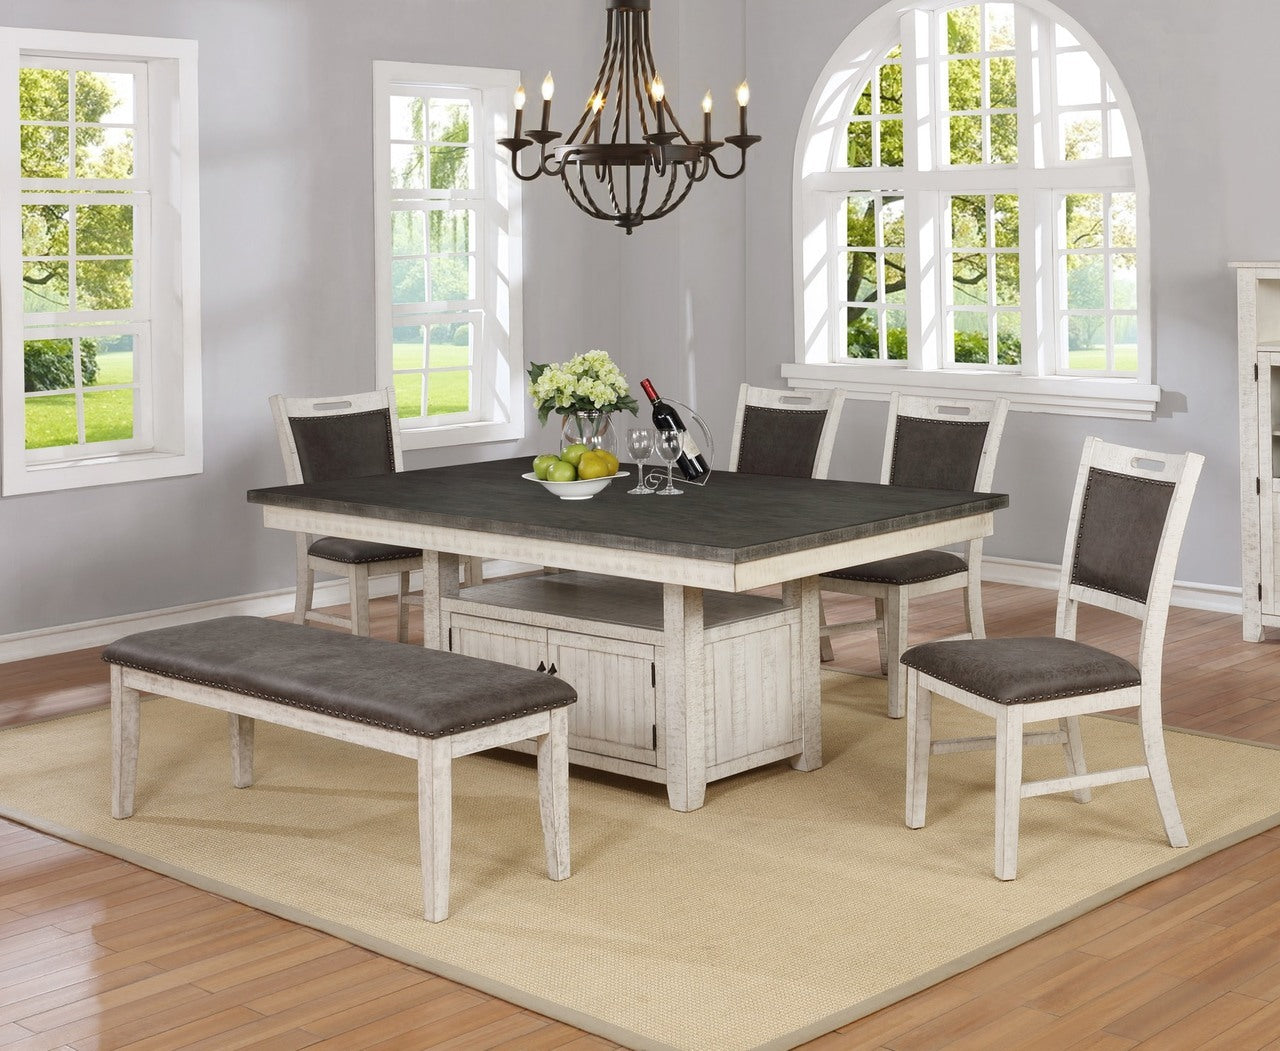 rubbed white and gray dining set